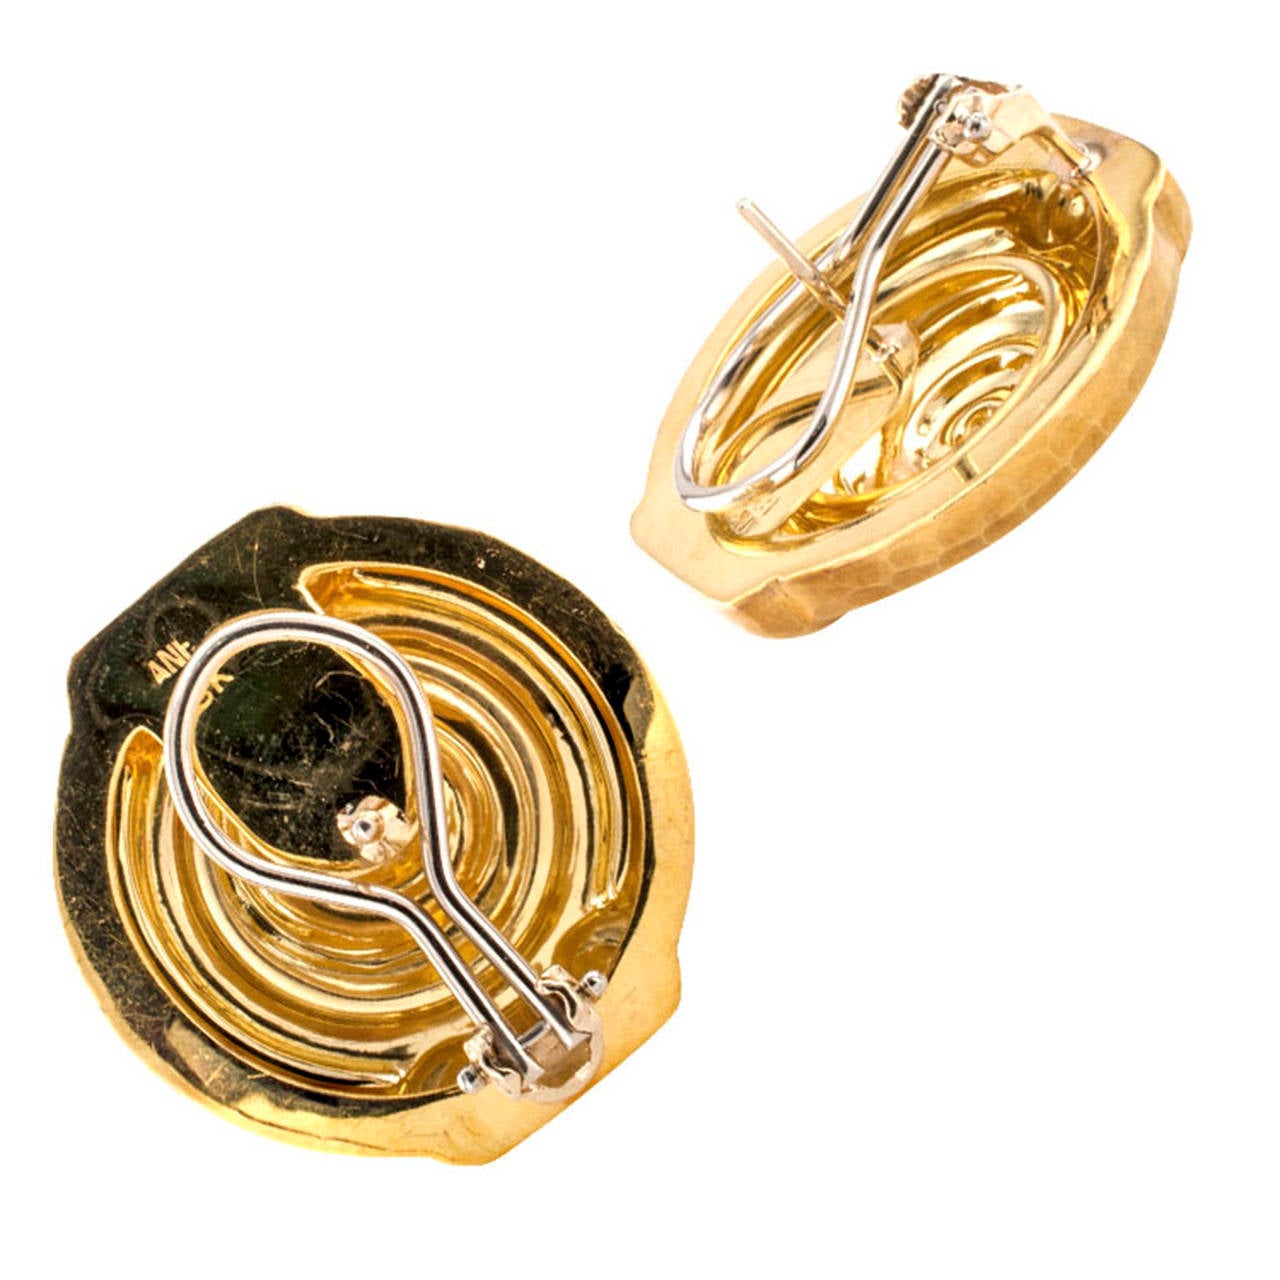 Hammered Gold Earrings

Circa 1980, Greek inspired, these earrings have a classic design with a twist, the perfect  go-to every day pair of gold earrings.  A spiraling motif with scrolled terminals serves as ground for a hammered texture on matte